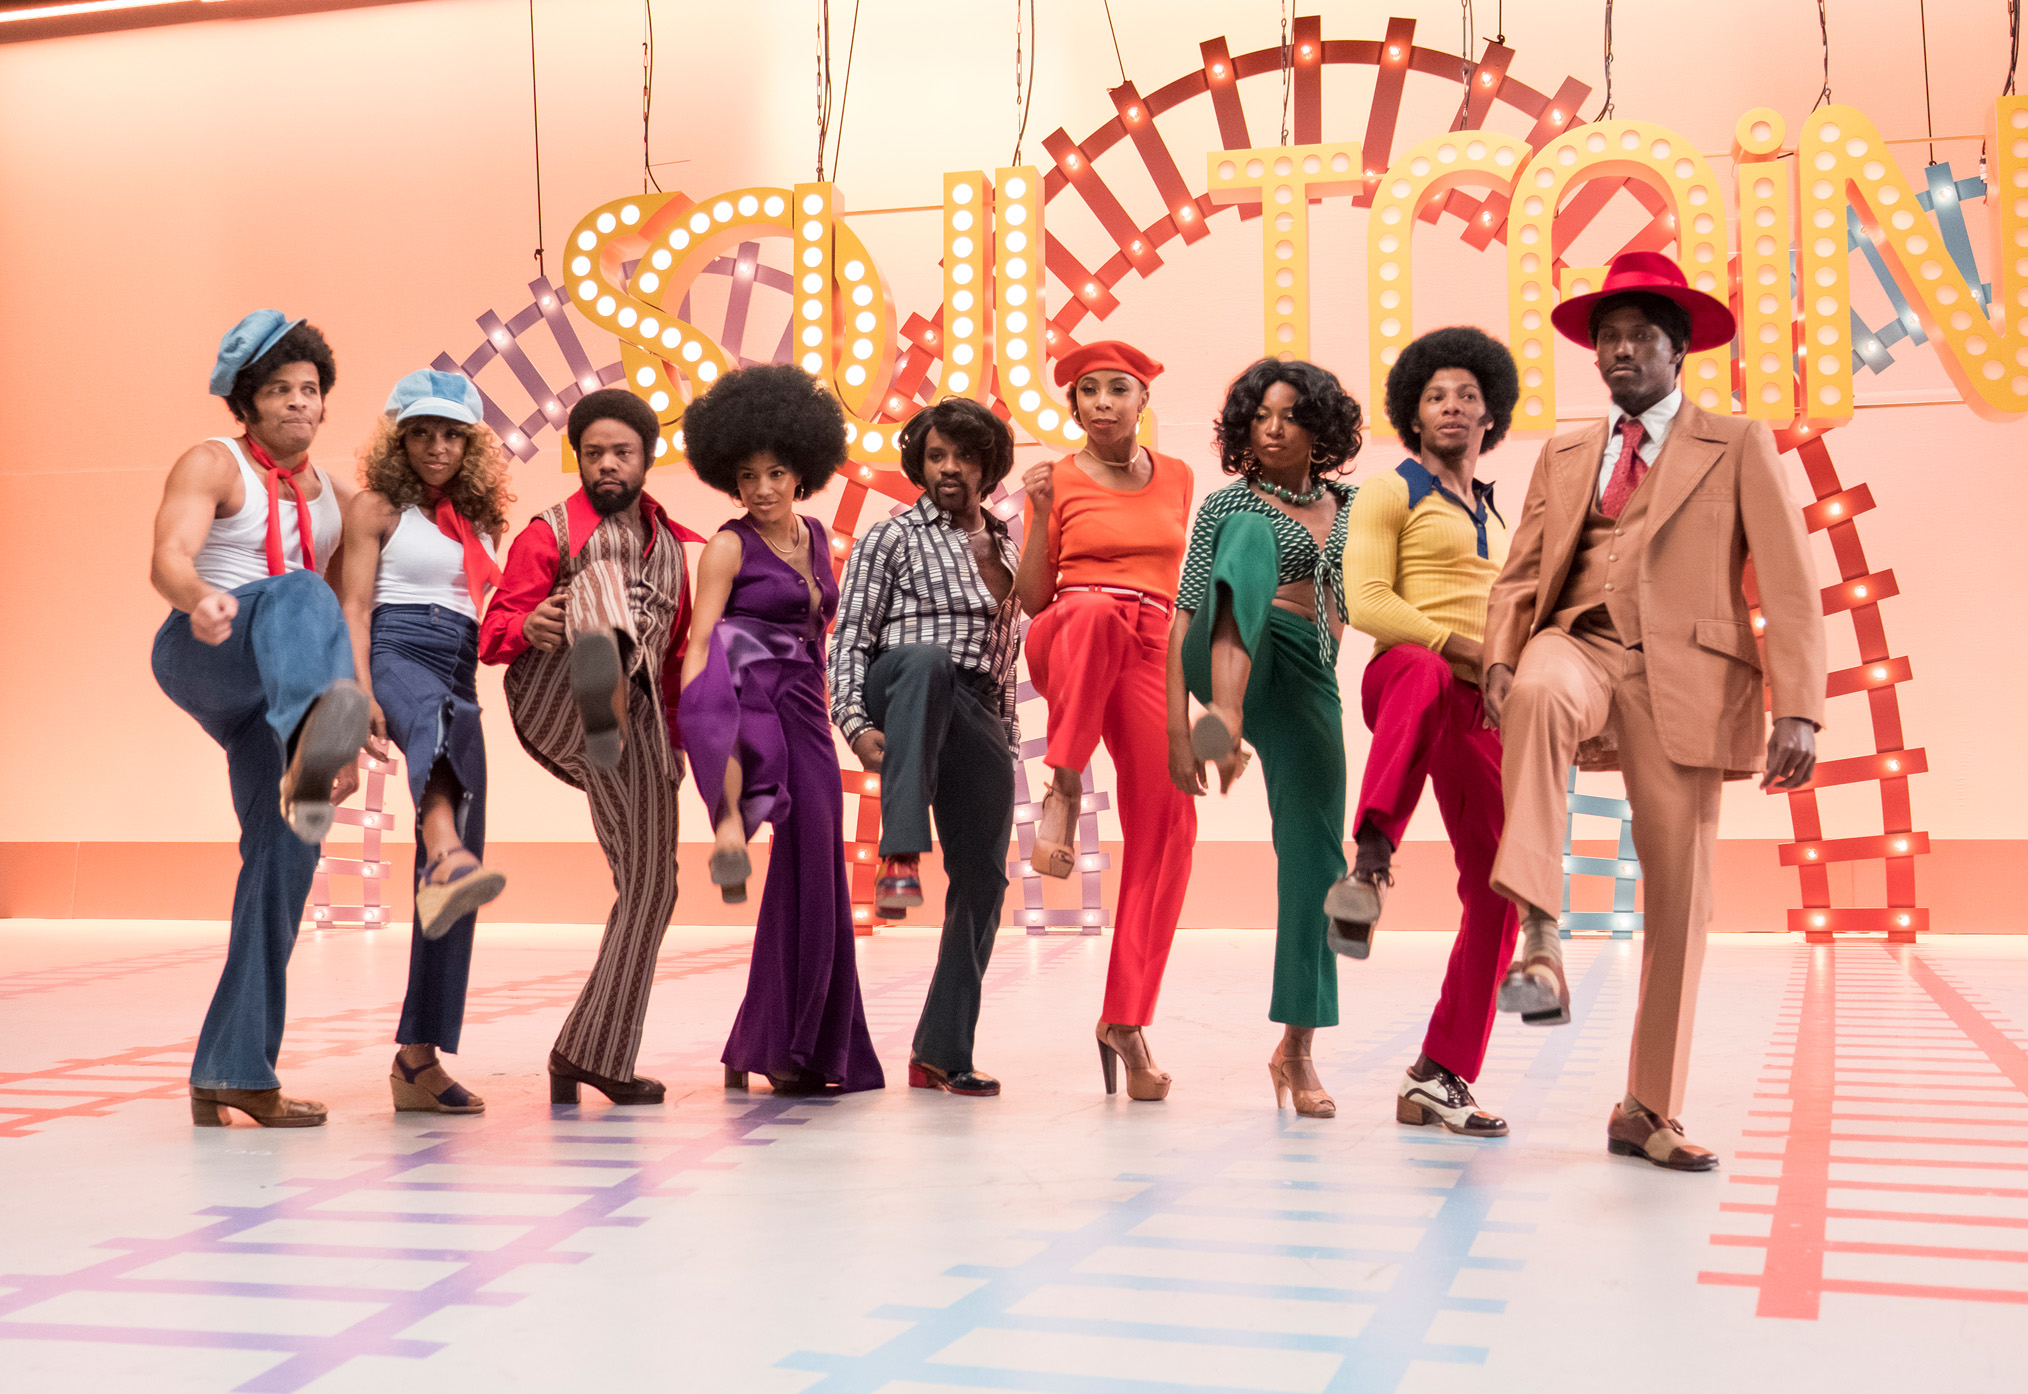 70s soul train outfits.